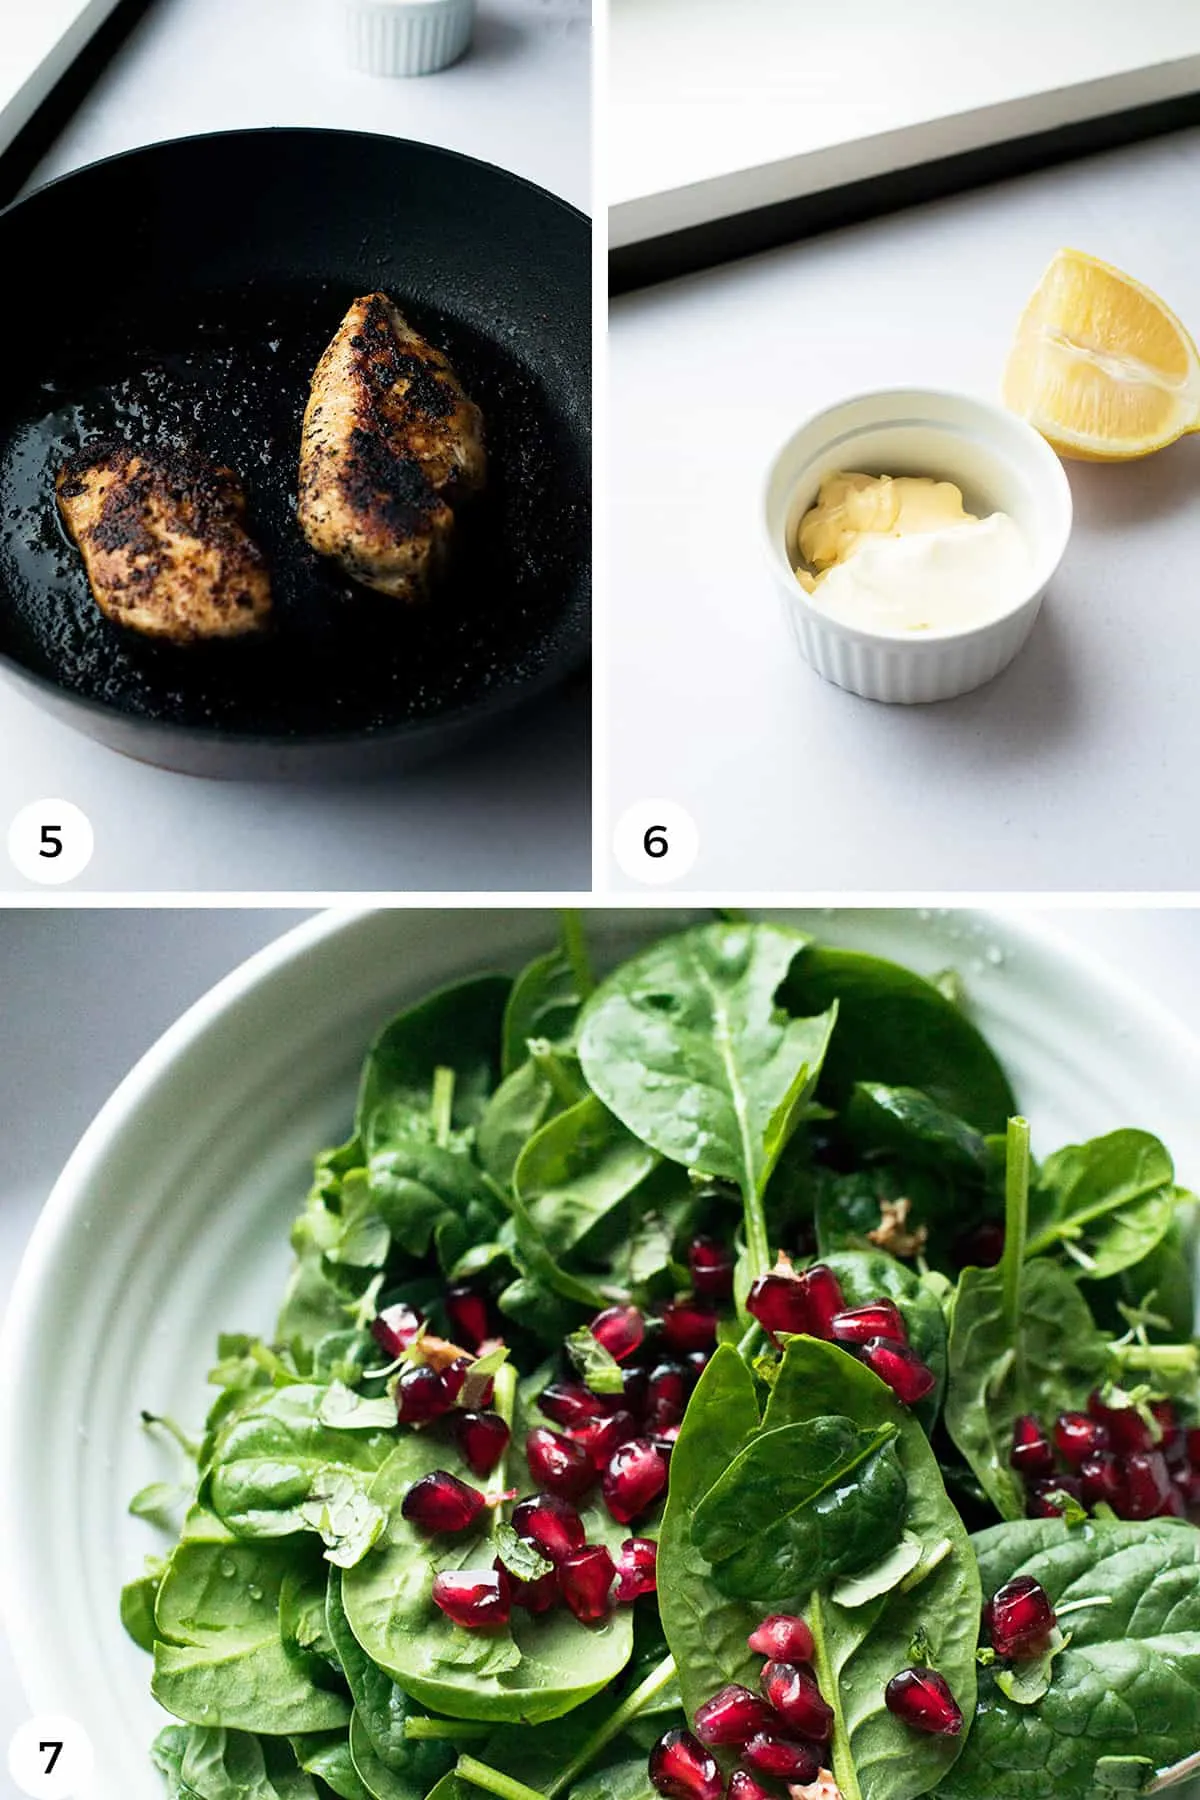 Steps to make chicken, salad and dressing.